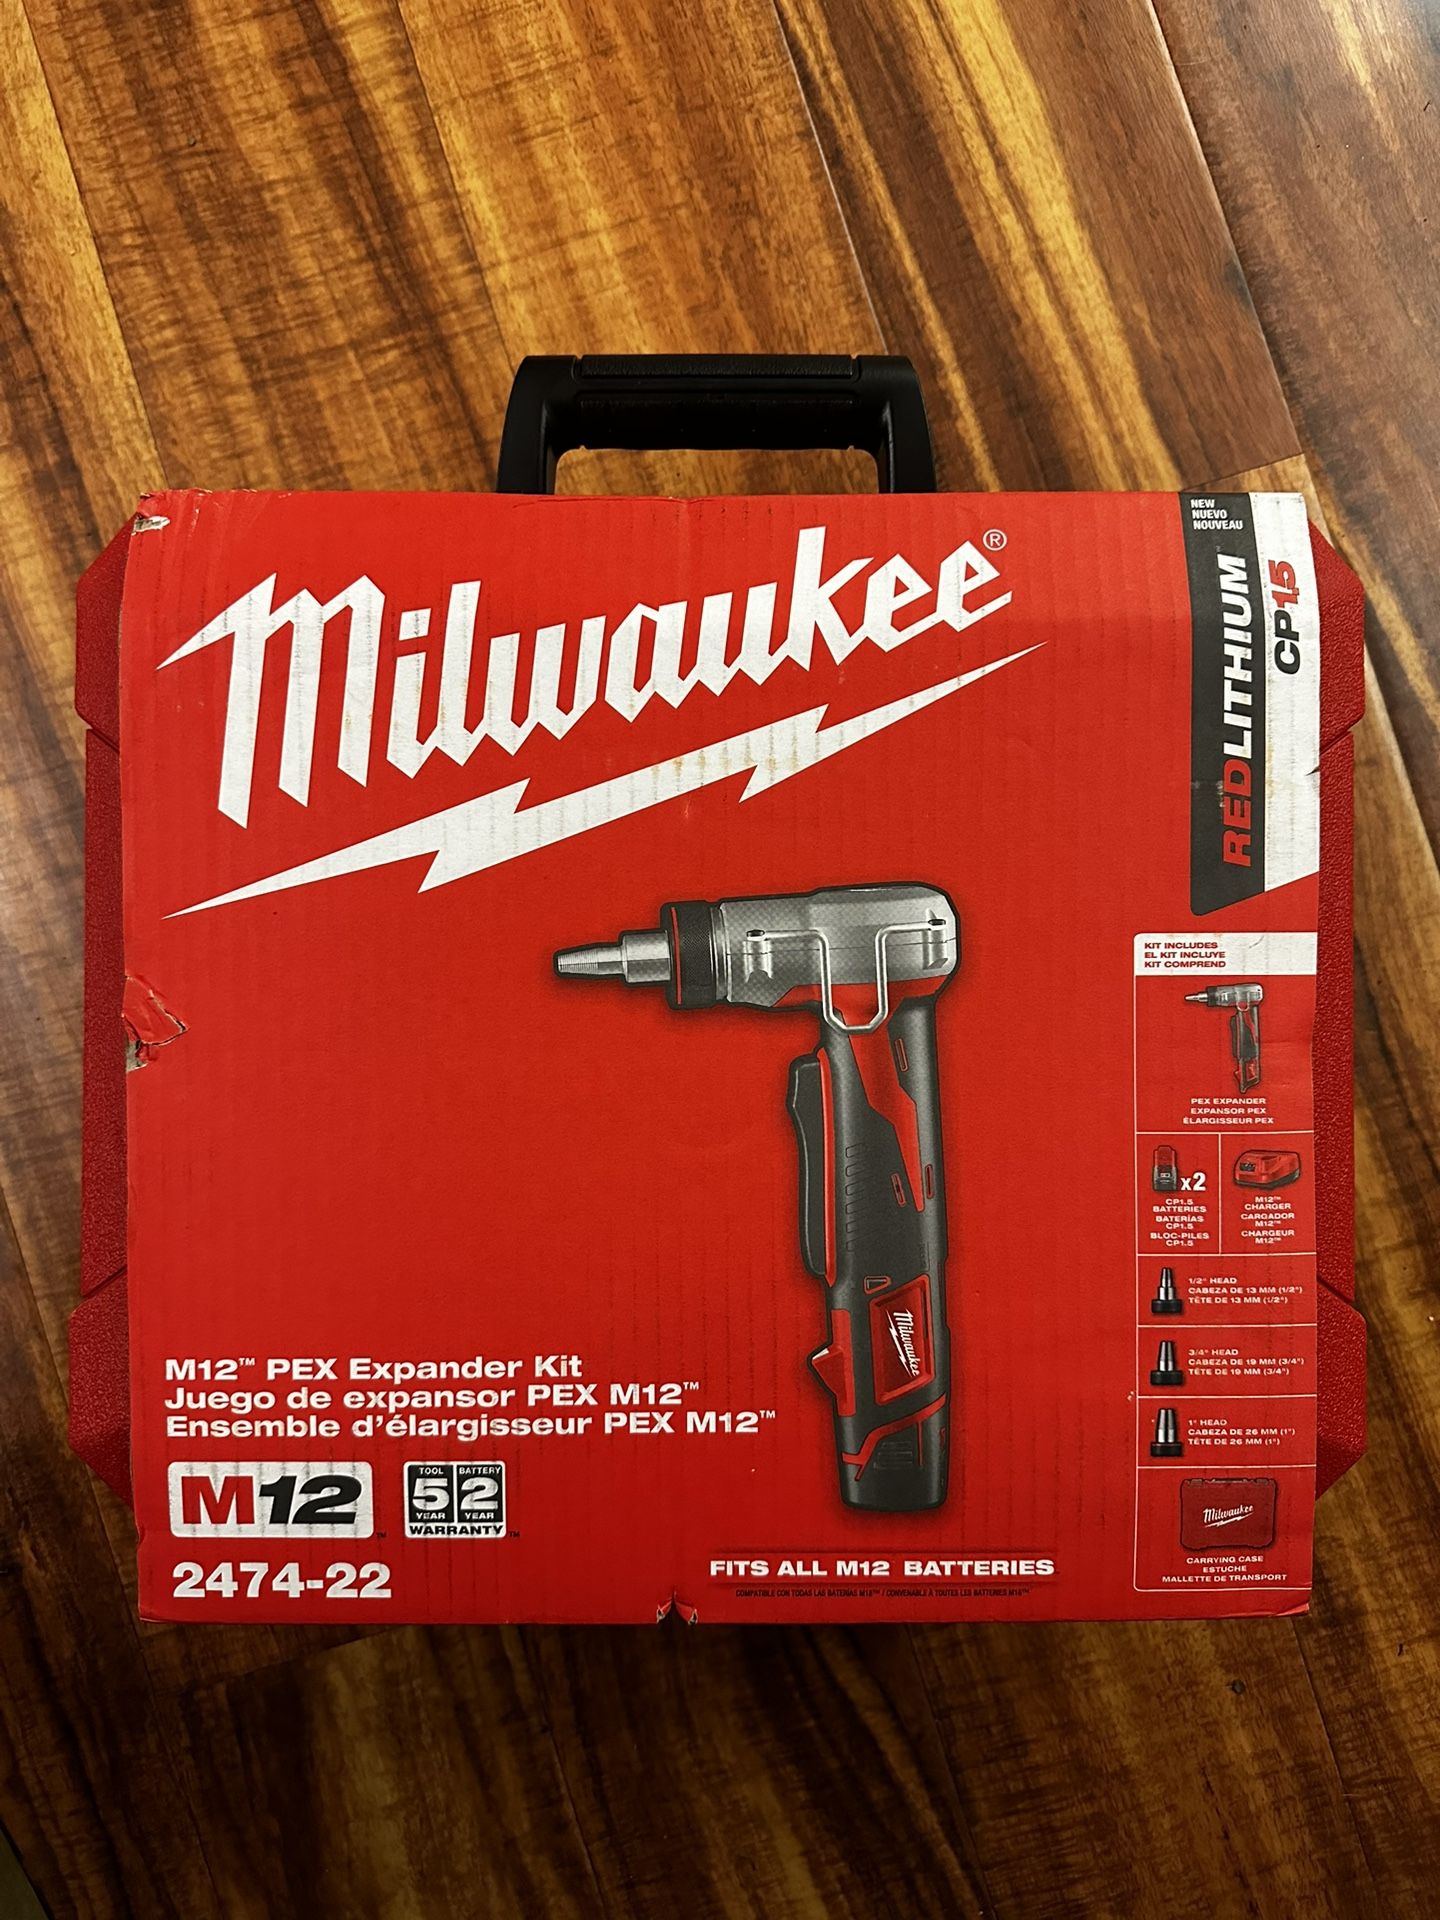 M12 12-Volt Lithium-Ion Cordless PEX Expansion Tool Kit with (2) 1.5 Ah Batteries, (3) Expansion Heads and Hard Case retail price $499.00  Today $350.